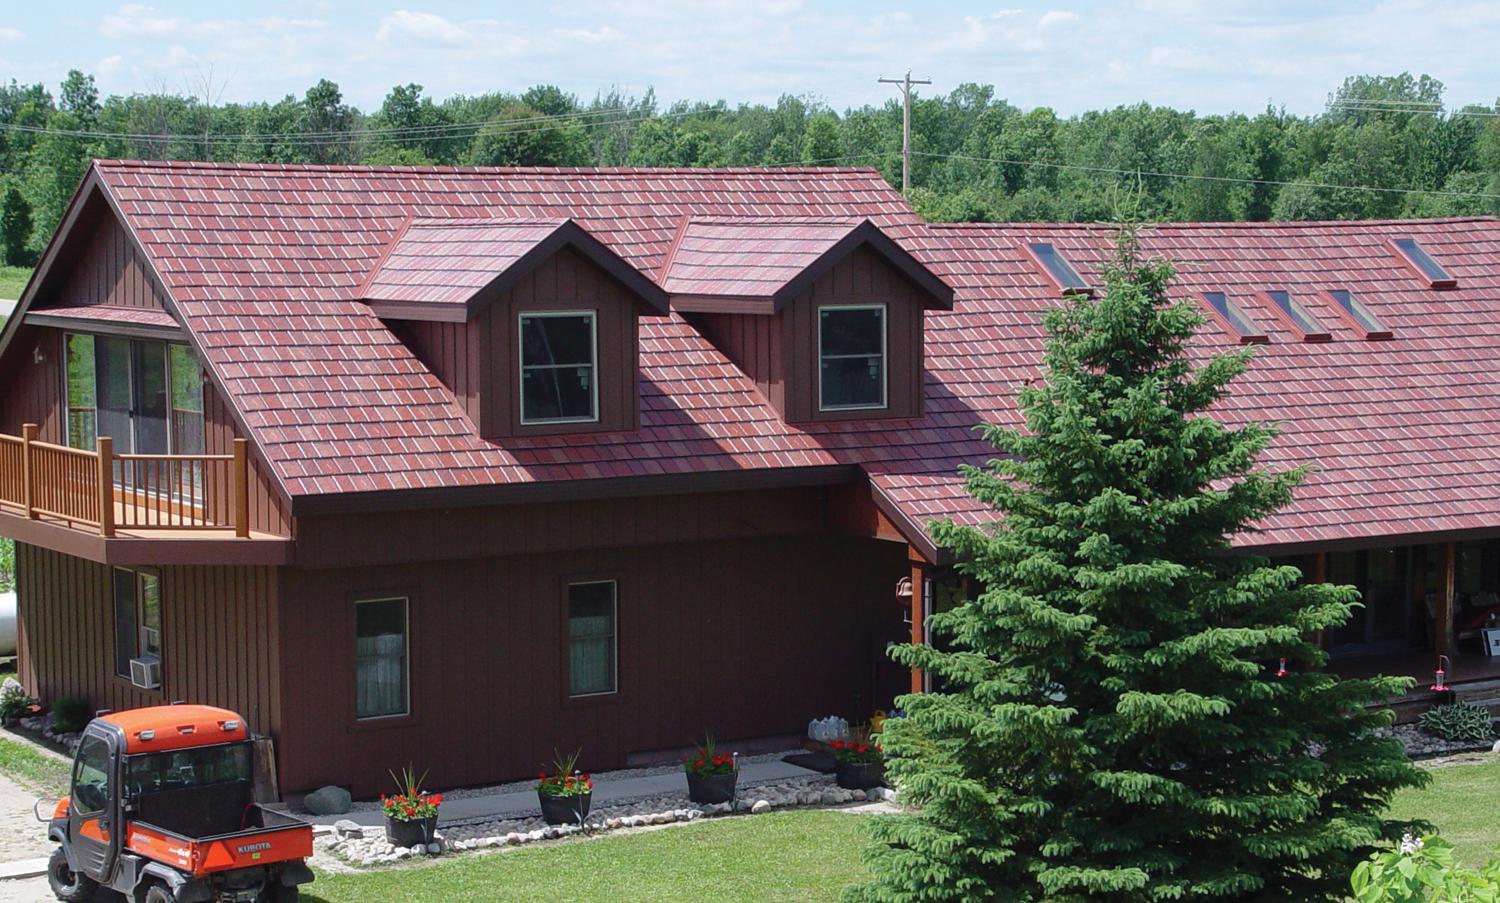 Arrowline Slate Roofing in a Classic Red Blend was installed on this rural farmhouse to not only match the color of other buildings but to give the home unique character.